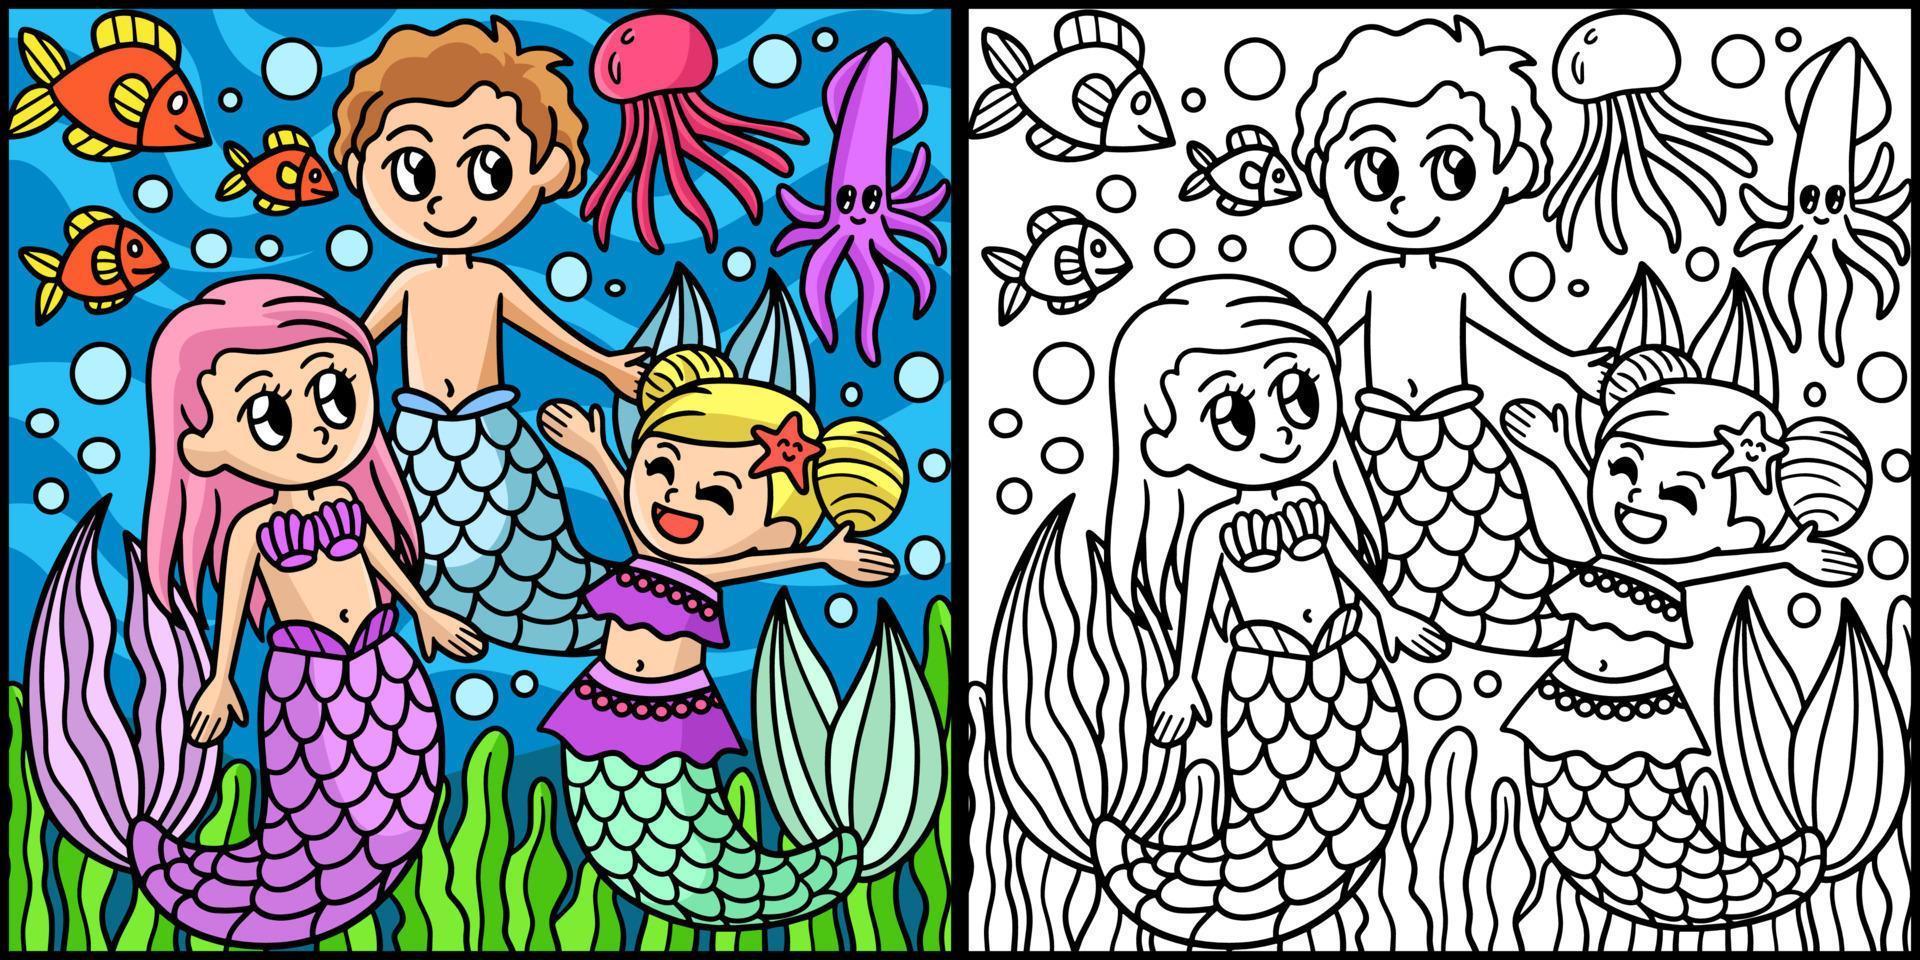 Mermaid Family Coloring Page Colored Illustration vector